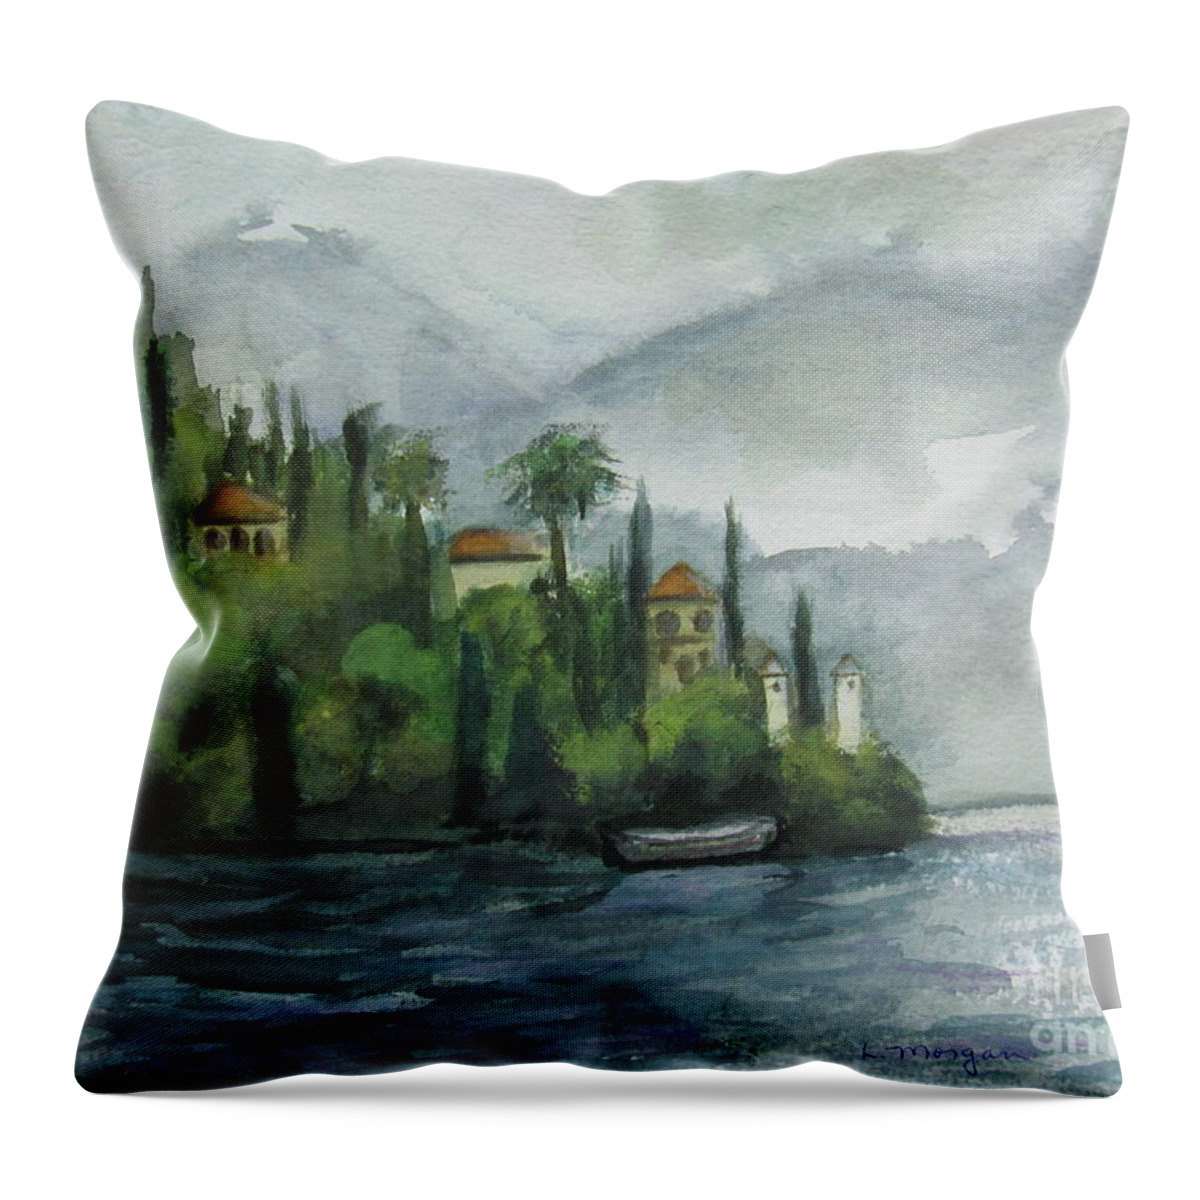 Mist Throw Pillow featuring the painting Misty Island by Laurie Morgan